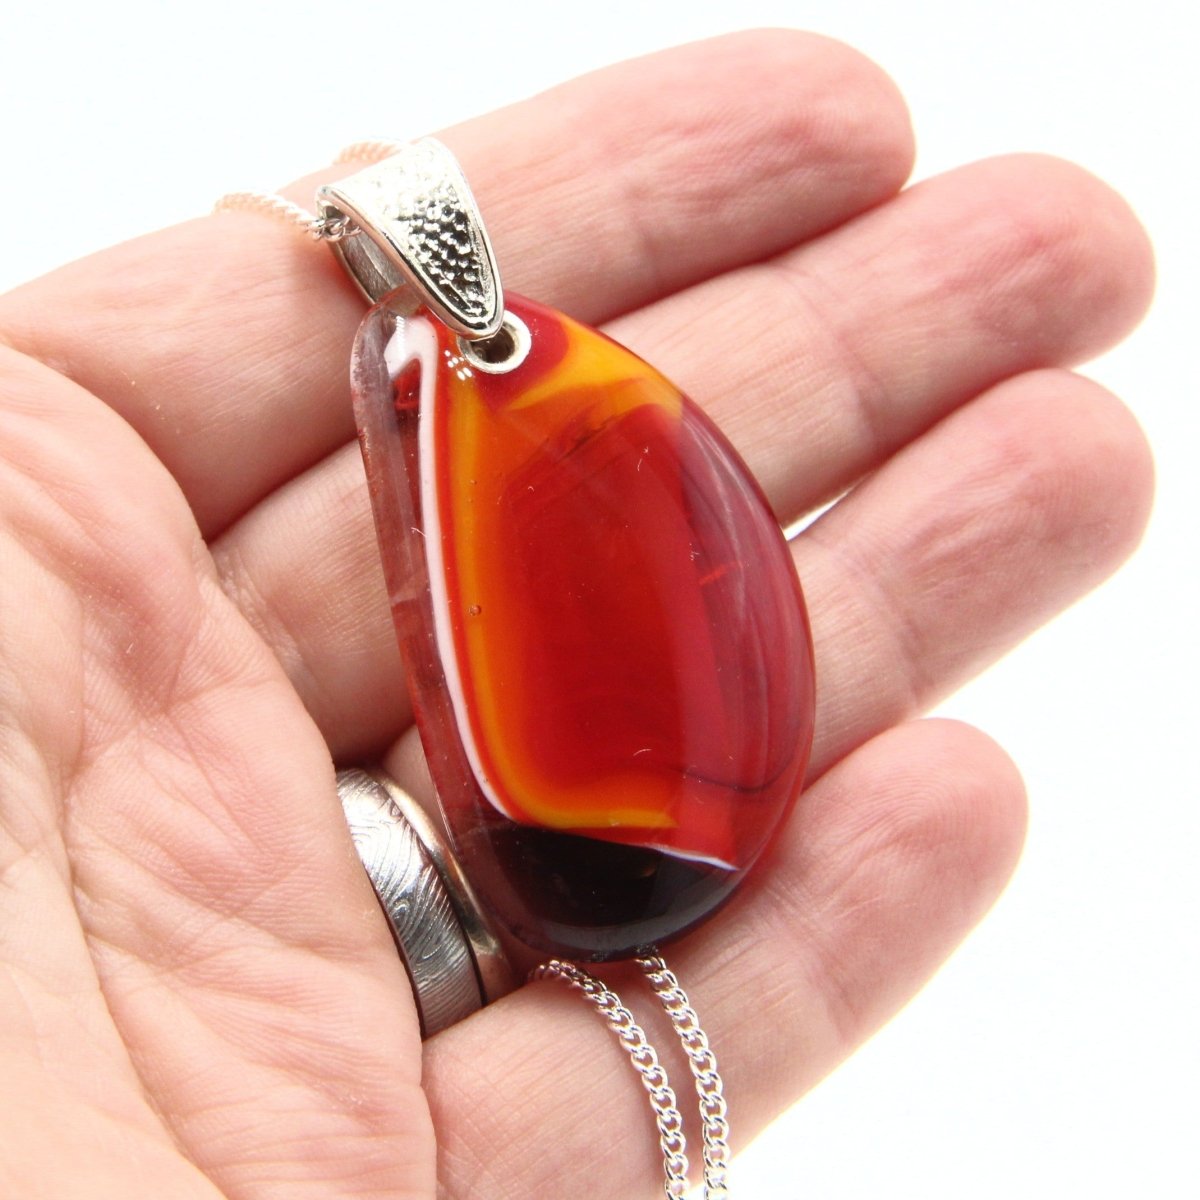 Orange Glass Pendant with Silver Accents